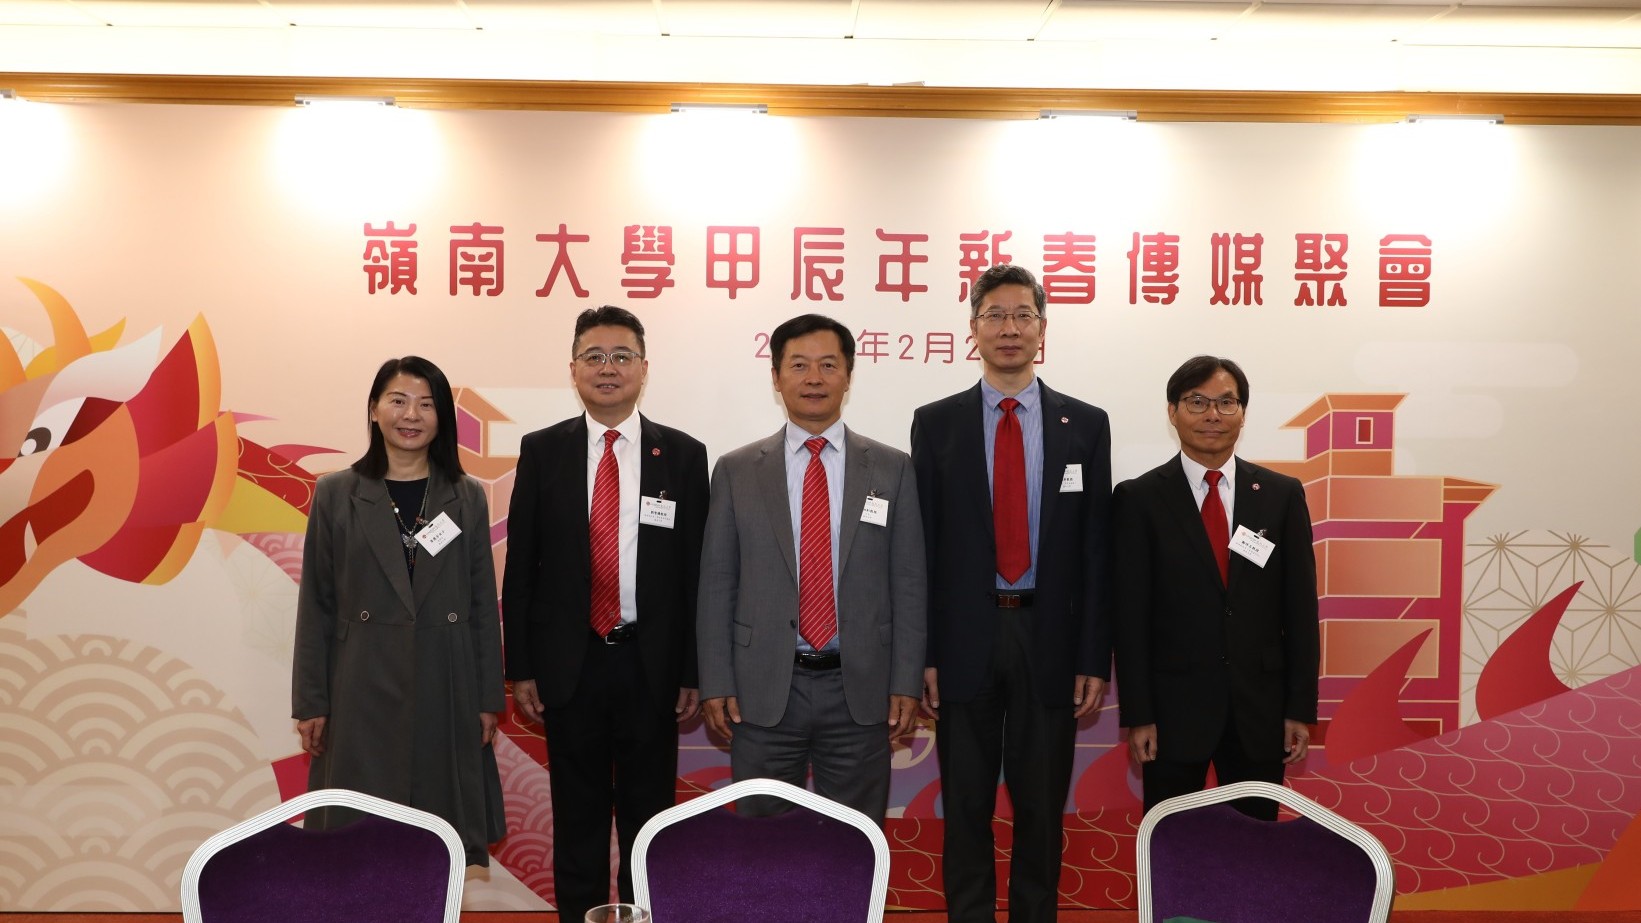 (From Left) Ms Margaret Cheung Wai-fong, Registrar; Prof Lau Chi-pang, Associate Vice-President (Academic Affairs and External Relations); Prof S. Joe Qin, President; Prof Xin Yao, Vice-President (Research and Innovation); Prof Sam Kwong Tak-wu, Associate Vice-President (Strategic Research) of Lingnan University